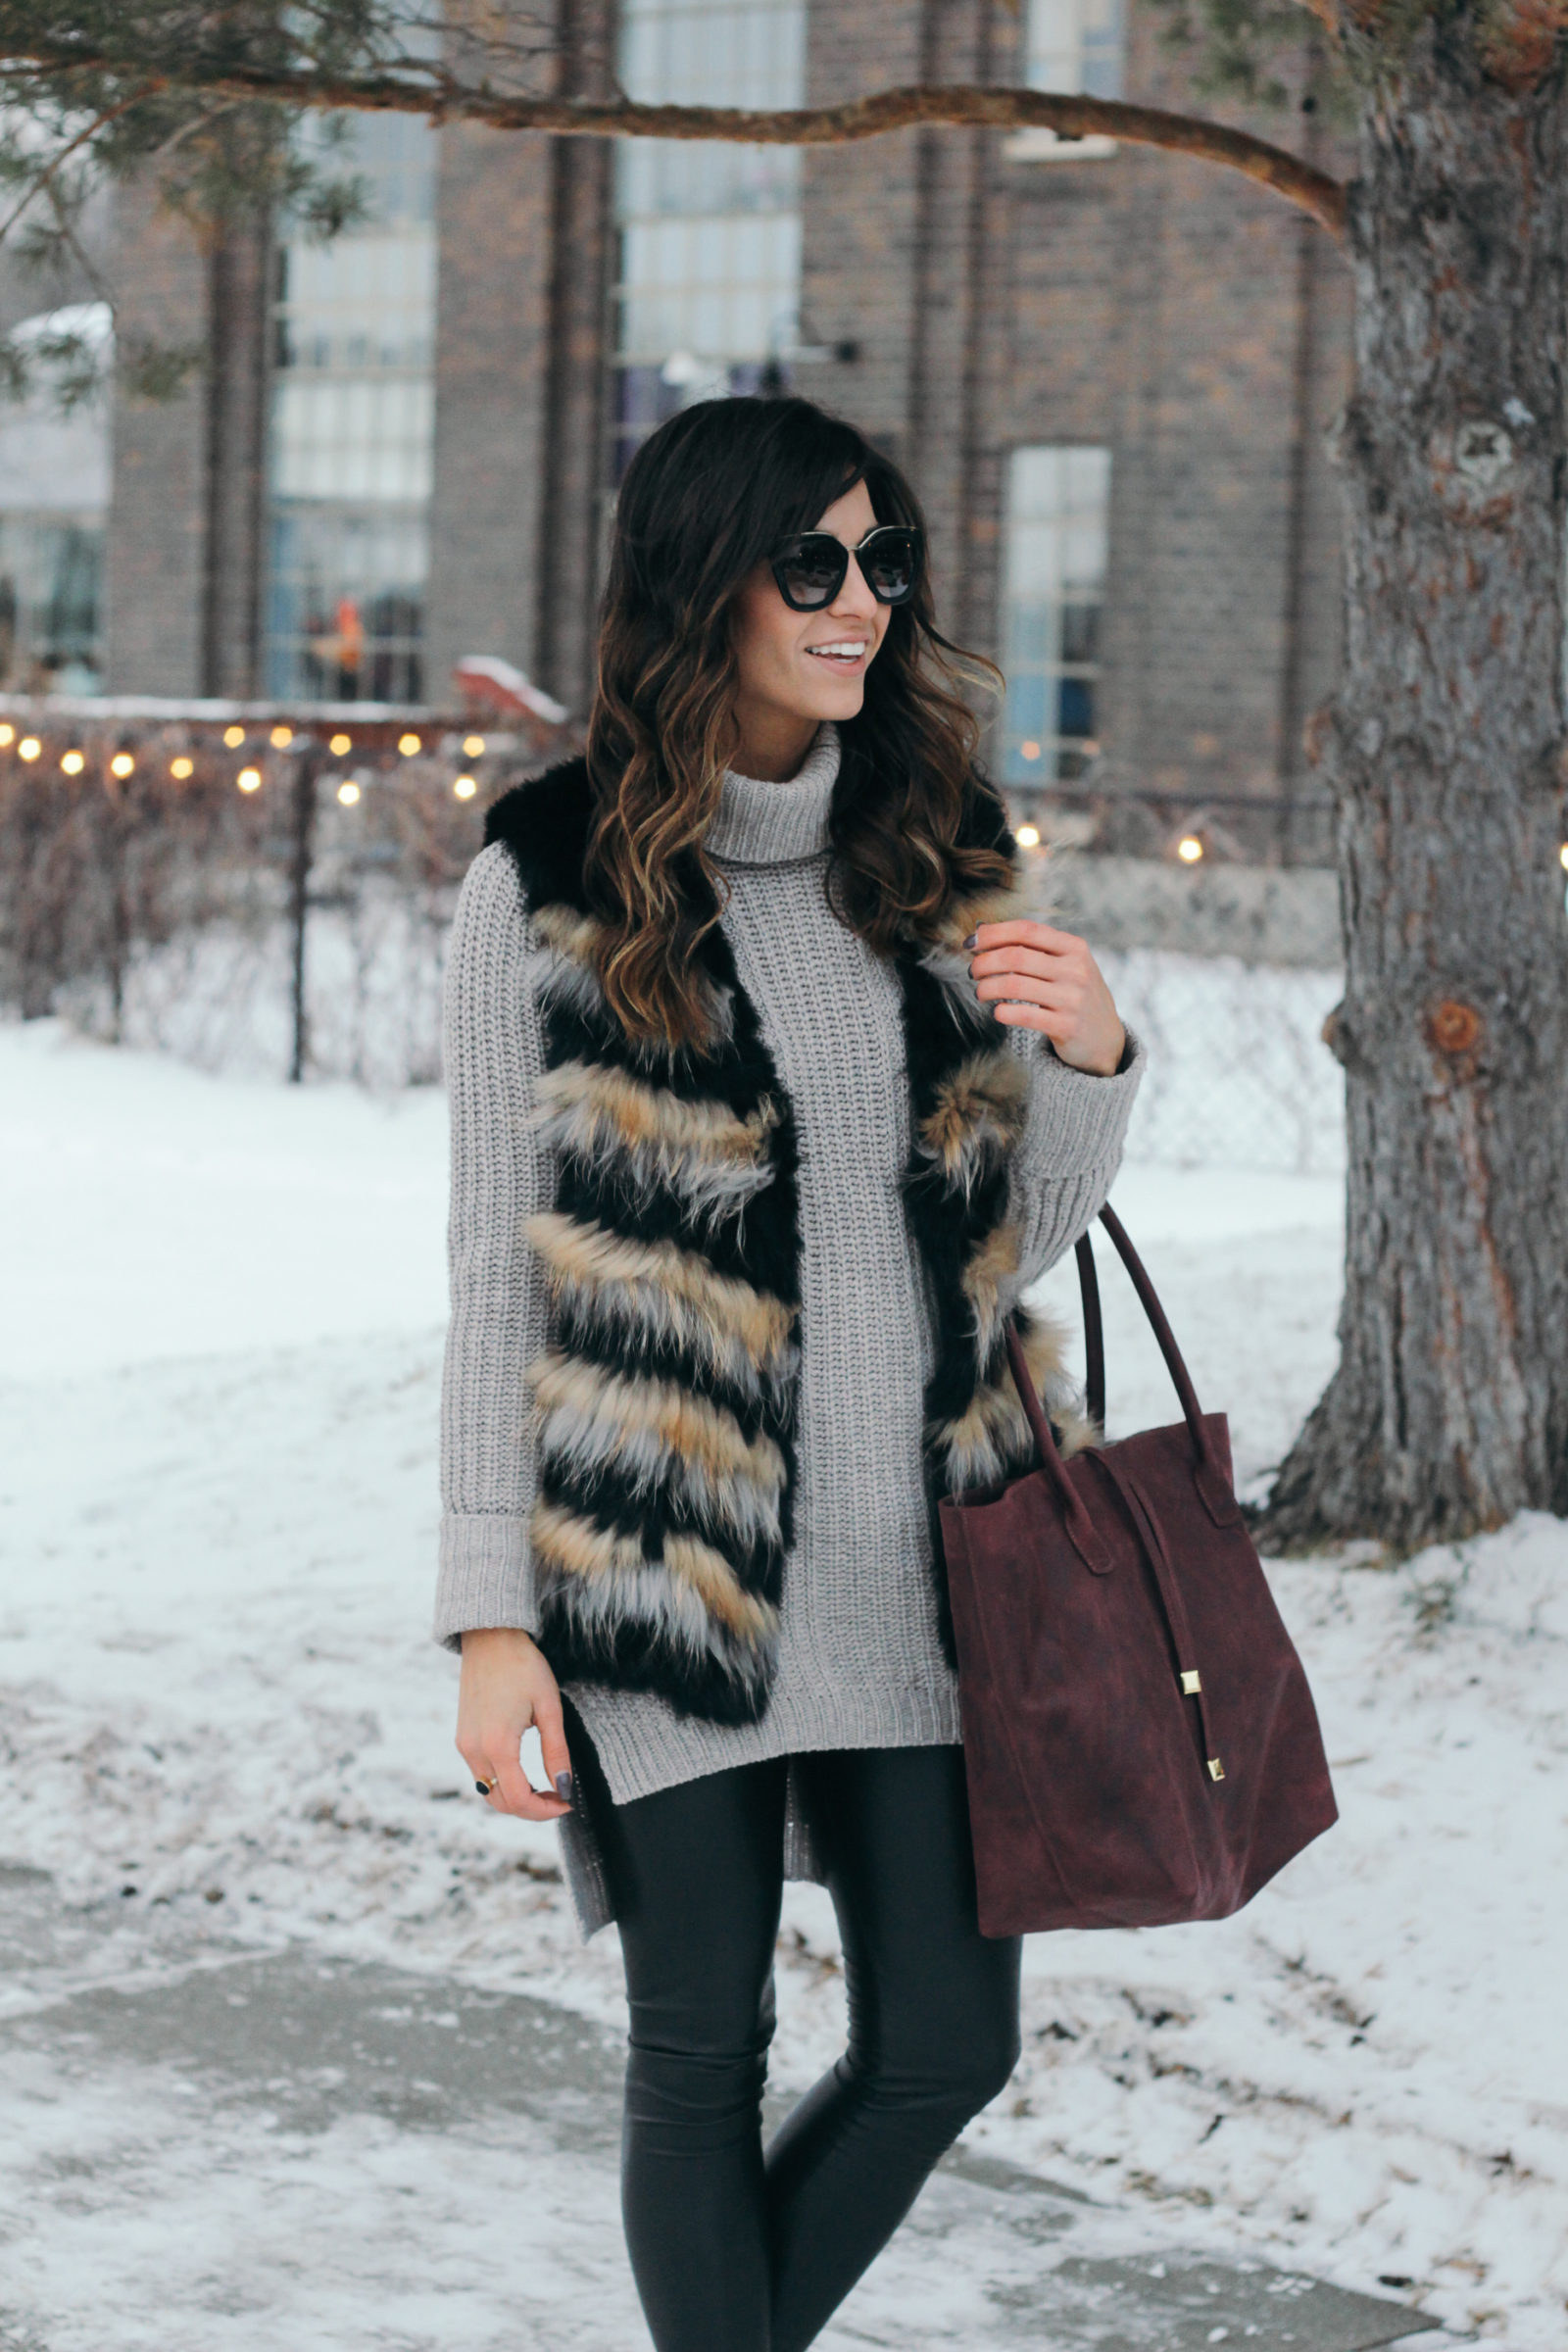 Winter Date Night Outfit - Teach Me Style - A style, beauty and life blog.